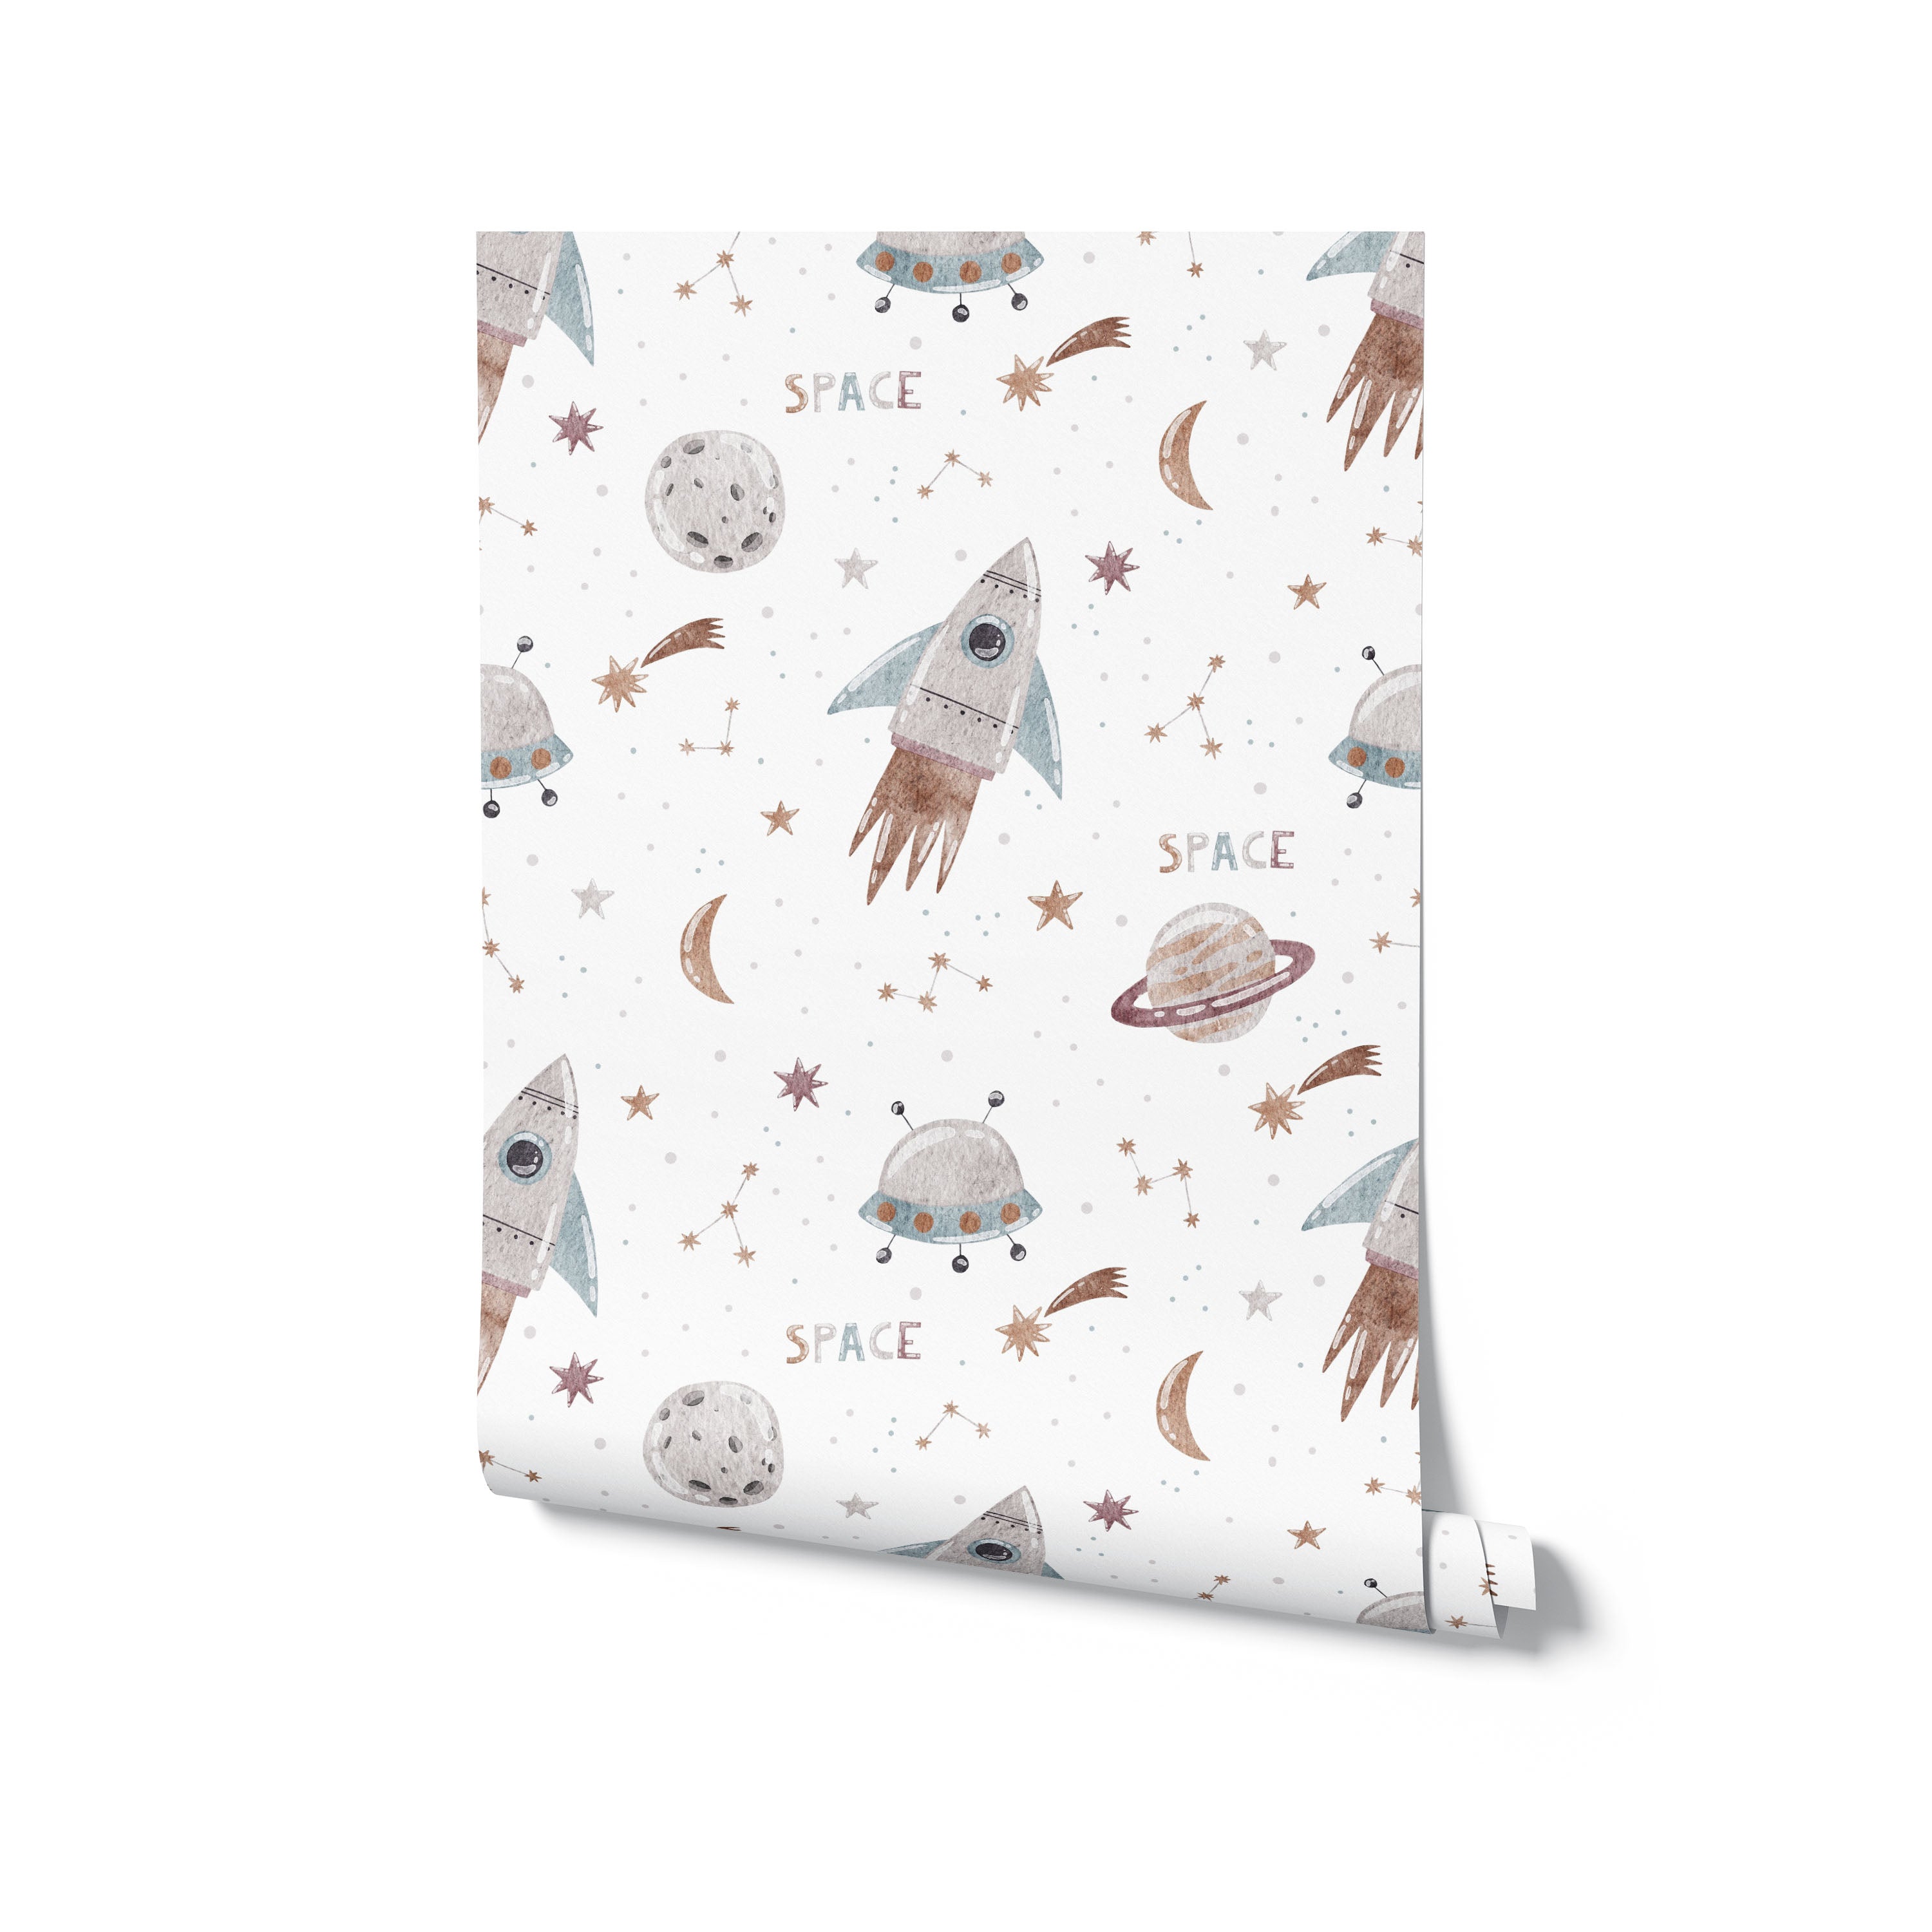 A roll of Space Craze Wallpaper depicting a playful pattern of rockets, planets, and stars on a neutral background, ideal for adding a touch of whimsy and adventure to any child’s room or creative space.